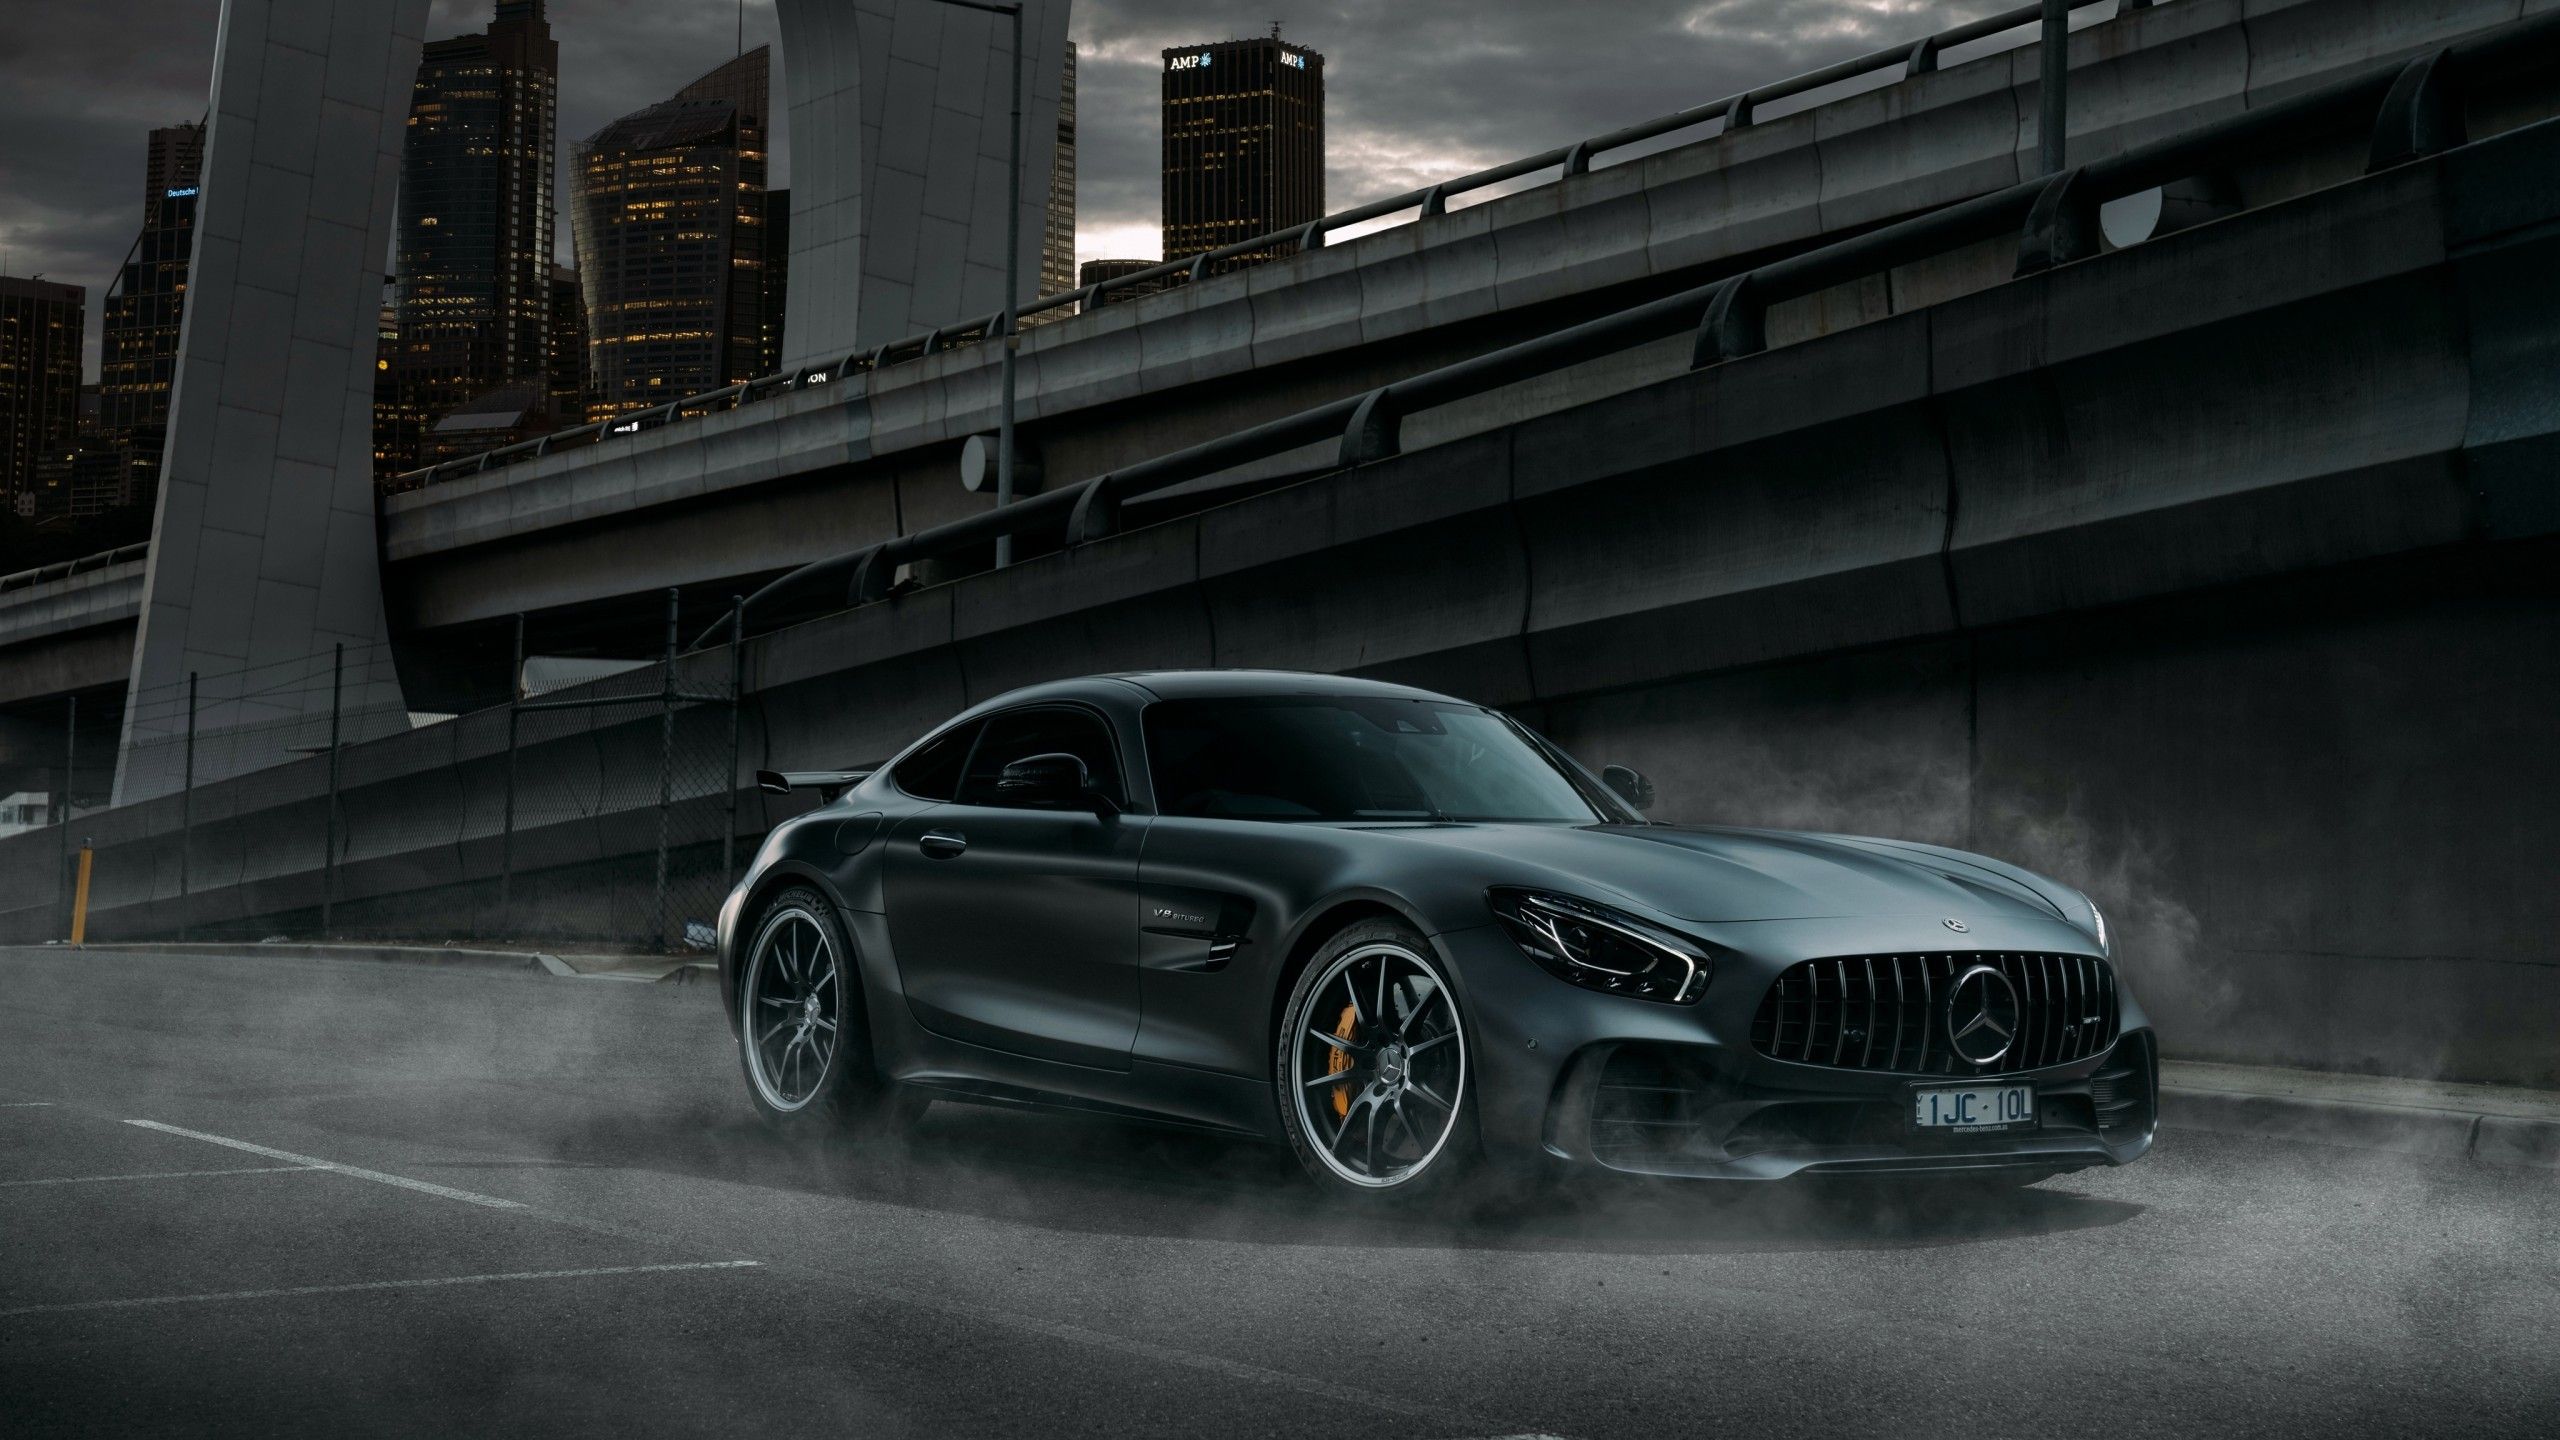 Download 2560x1440 Mercedes Benz Amg Gt R, Supercar, Cars, Black, Side View Wallpaper For IMac 27 Inch